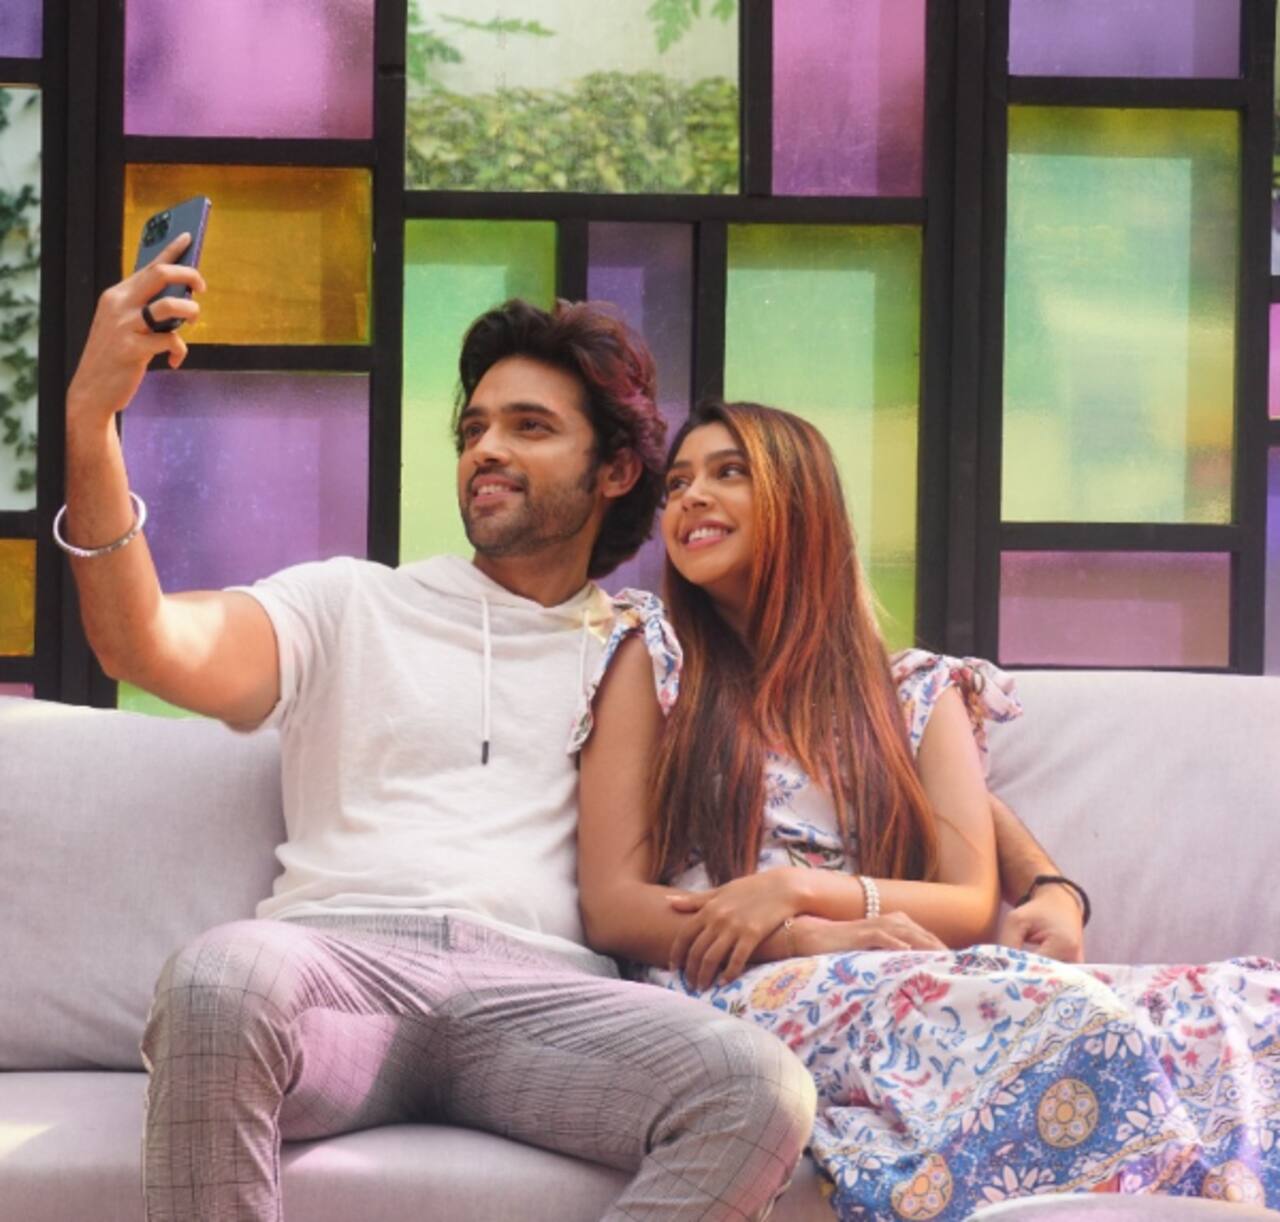 Kaisi Yeh Yaariaan 4: Parth Samthaan and Niti Taylor are set to rock the show